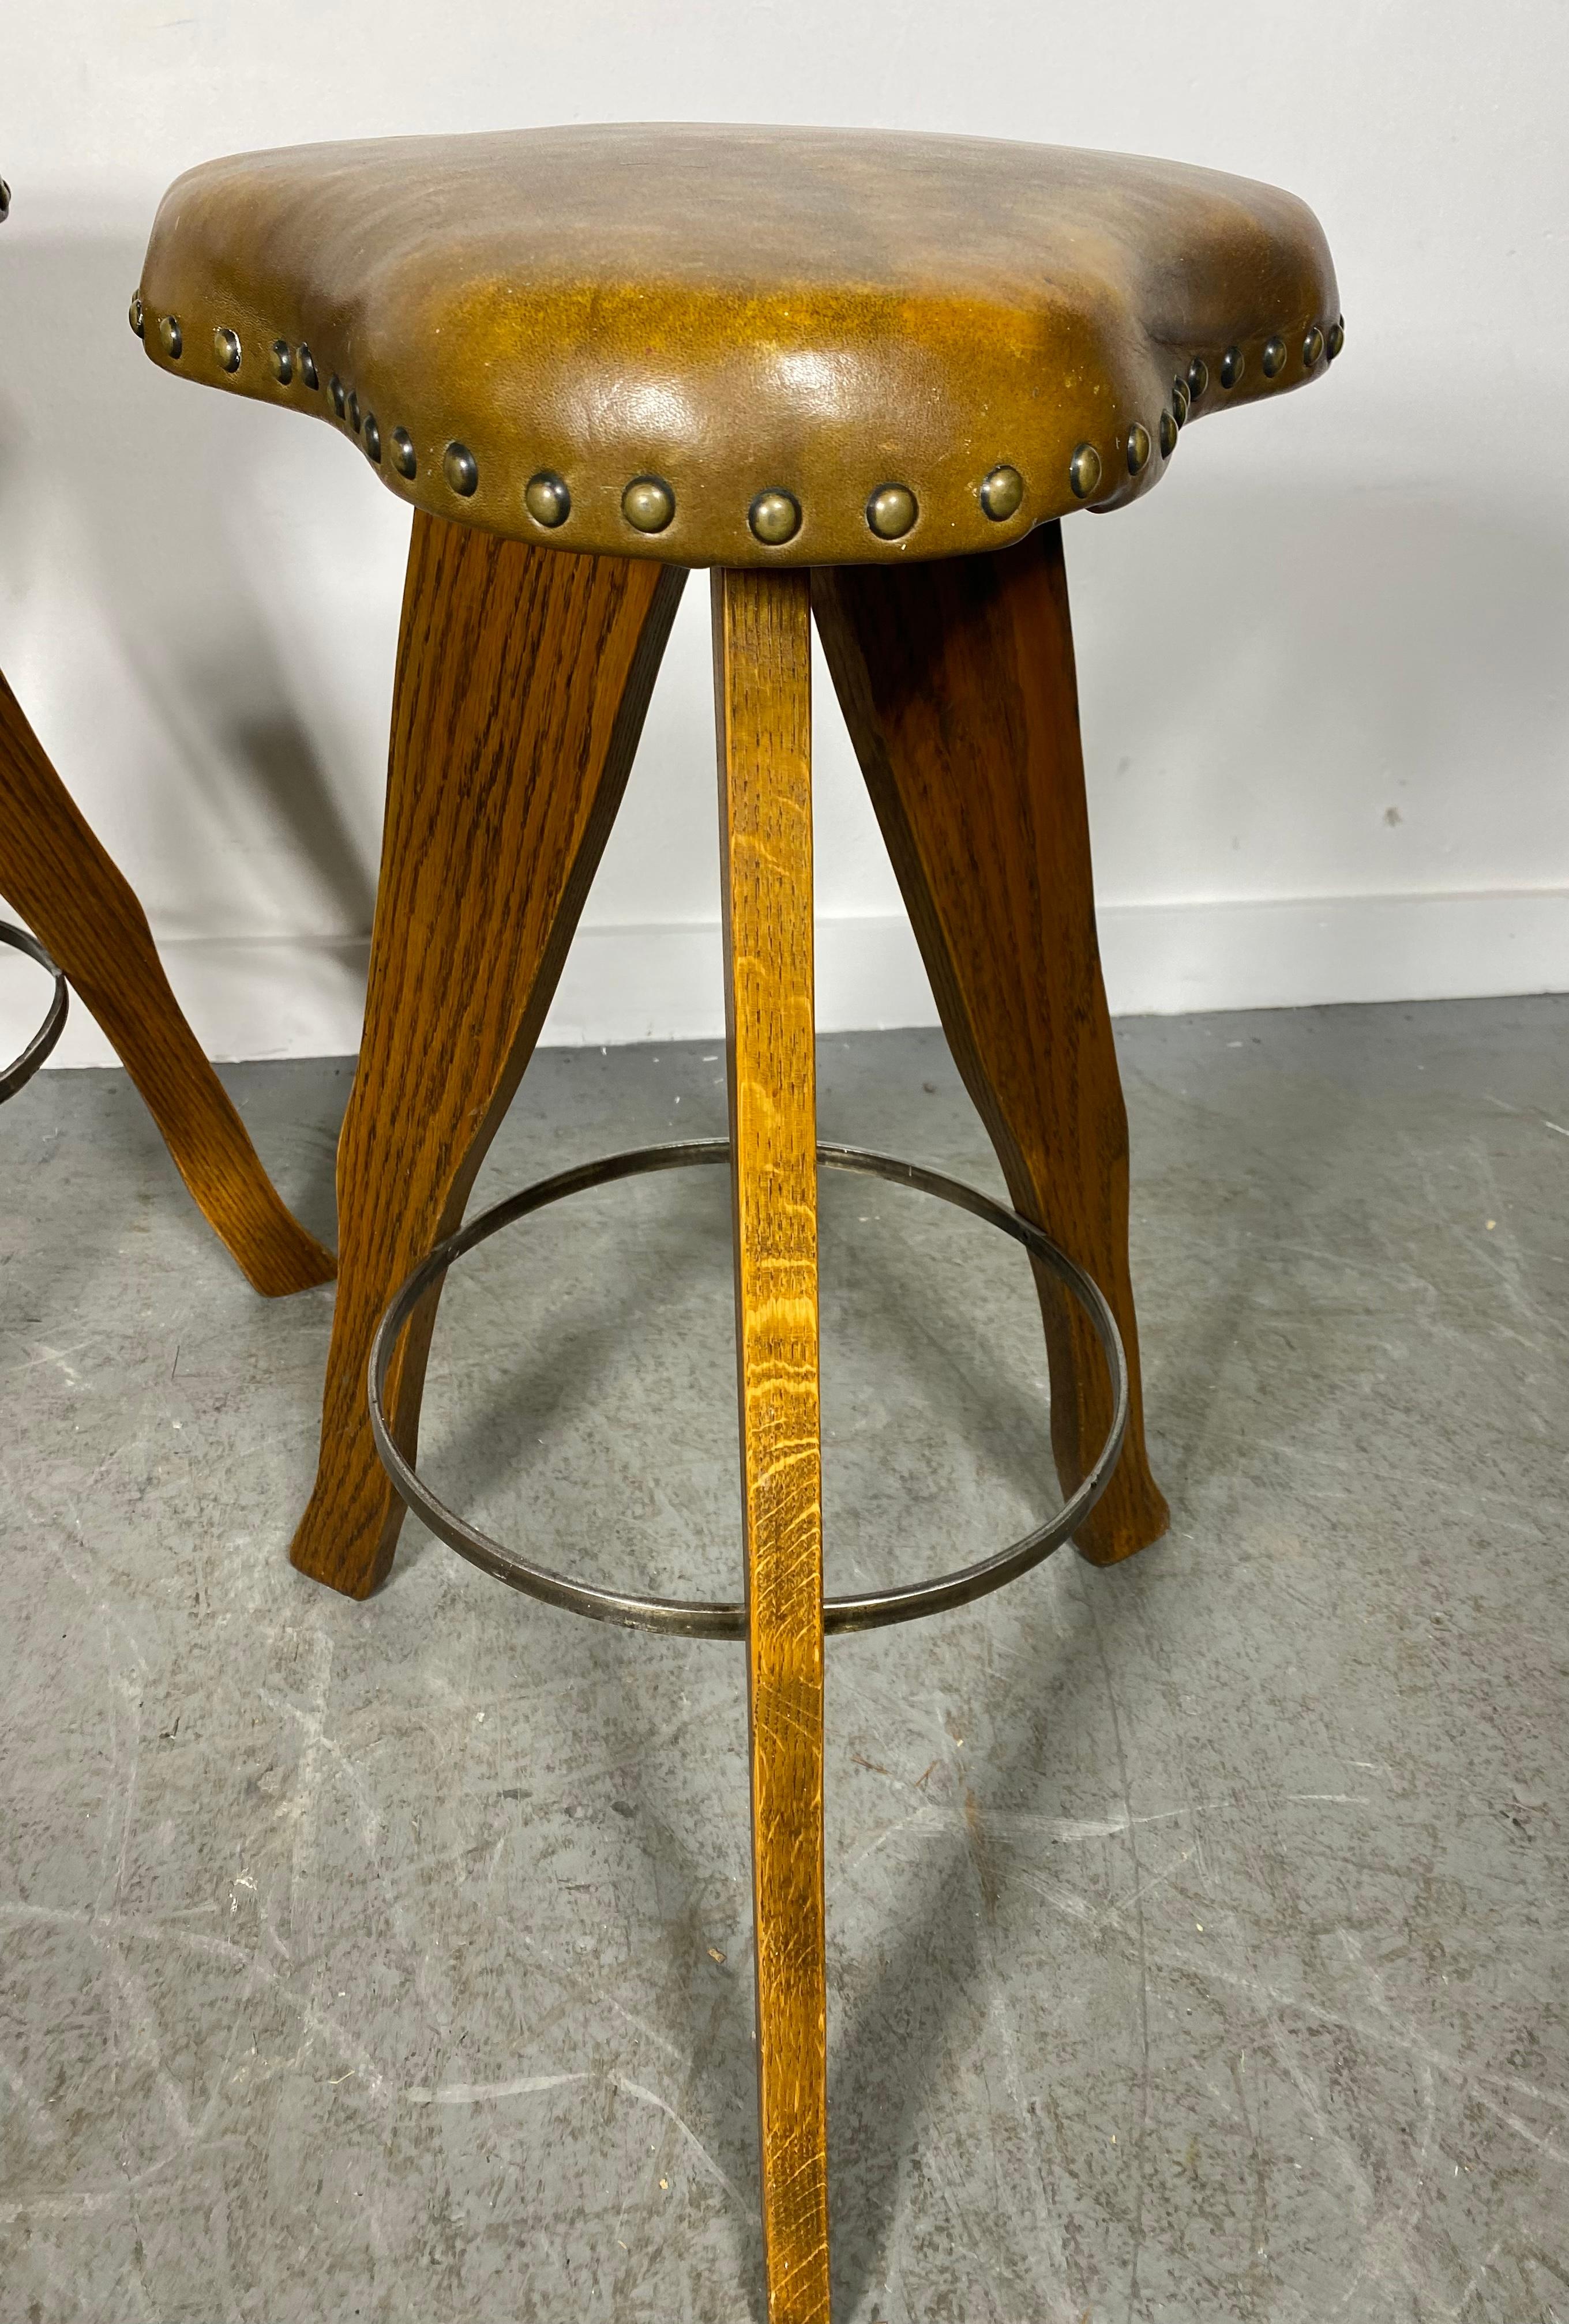 Unusual Rustic/Modern Farmhouse Oak and Leather Stools. Clover shape top. Excellent original condition, sturdy, well made.